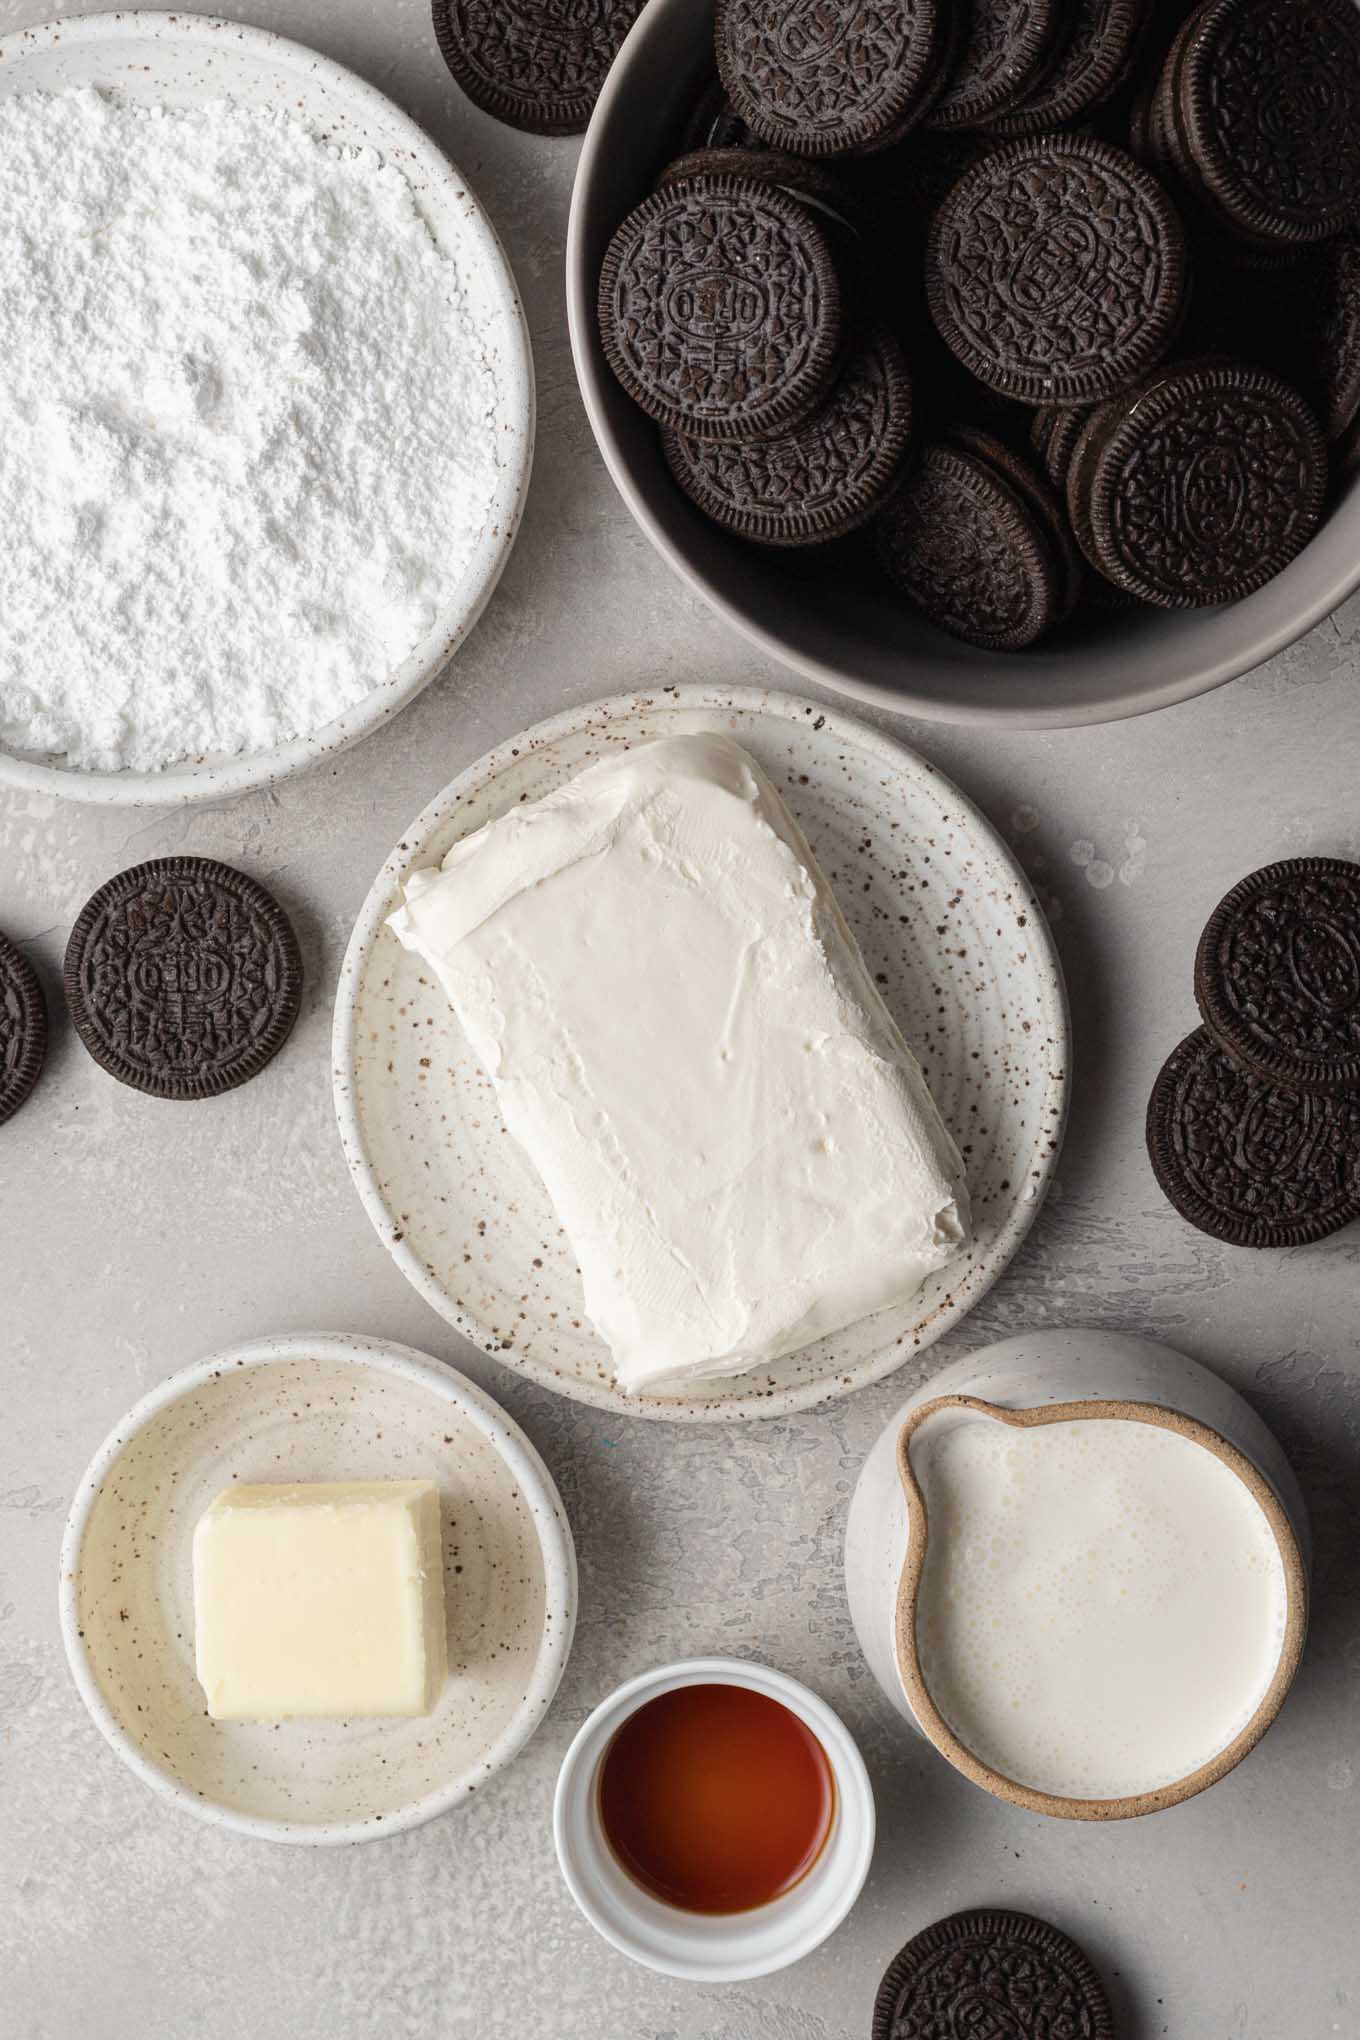 An overhead view of the various ingredients needed to make an Oreo pie.